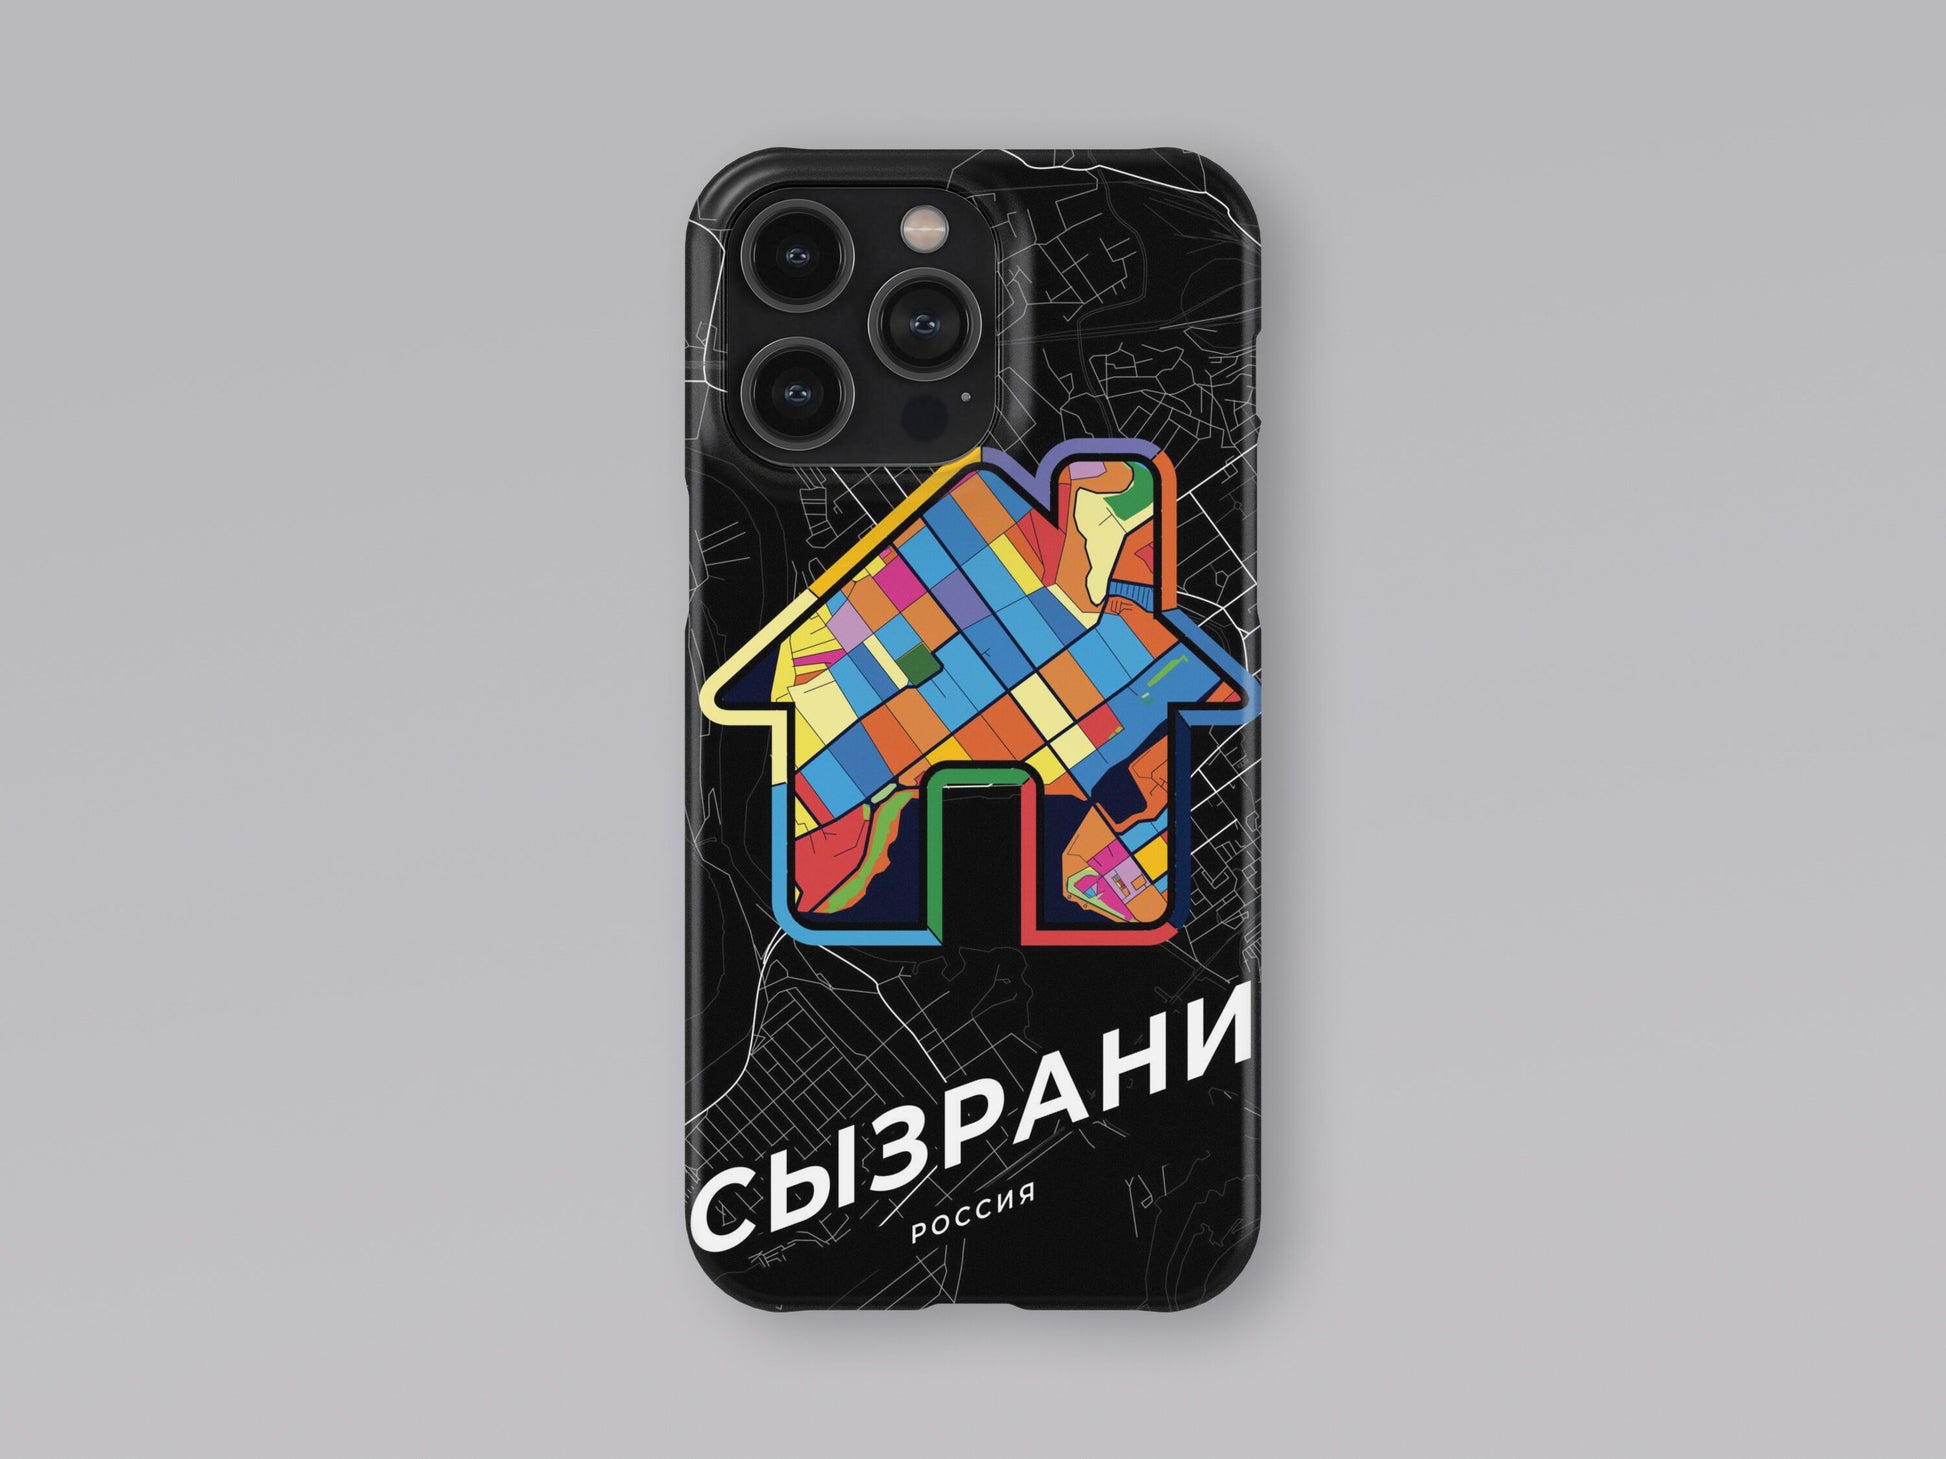 Syzran Russia slim phone case with colorful icon 3